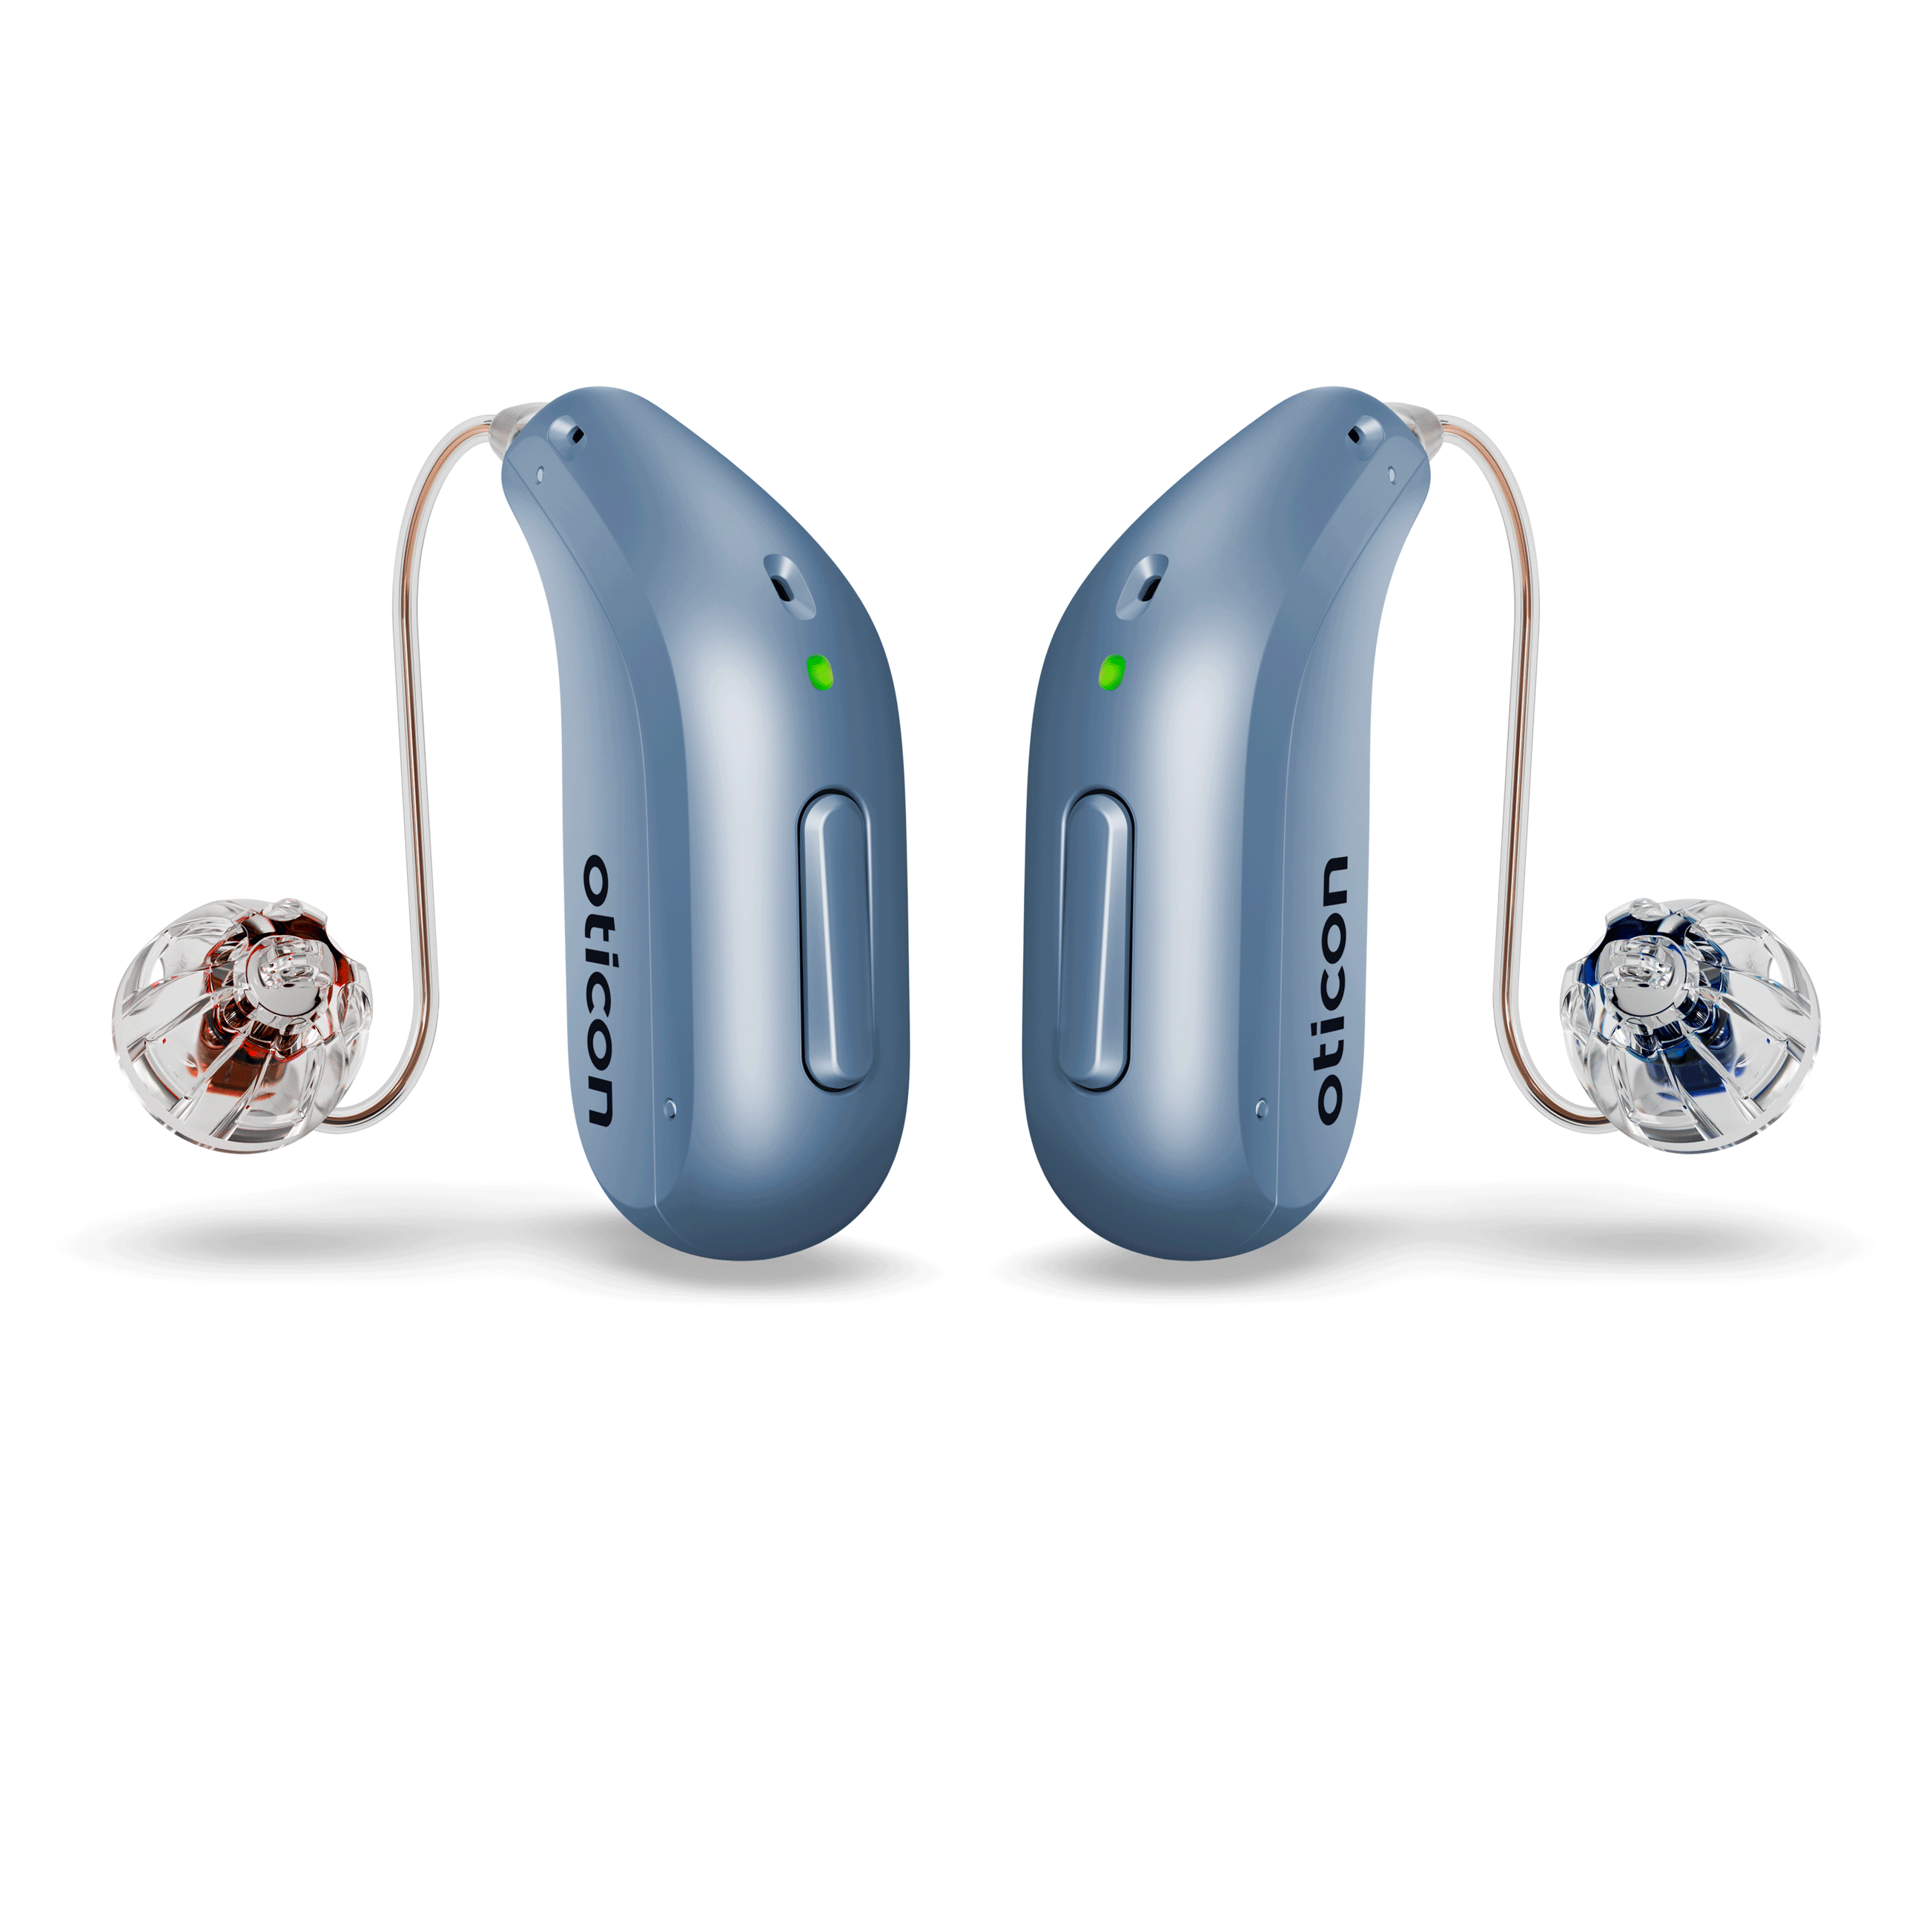 Oticon Intent hearing aid at EarTech Hearing Aids in Sarasota, FL